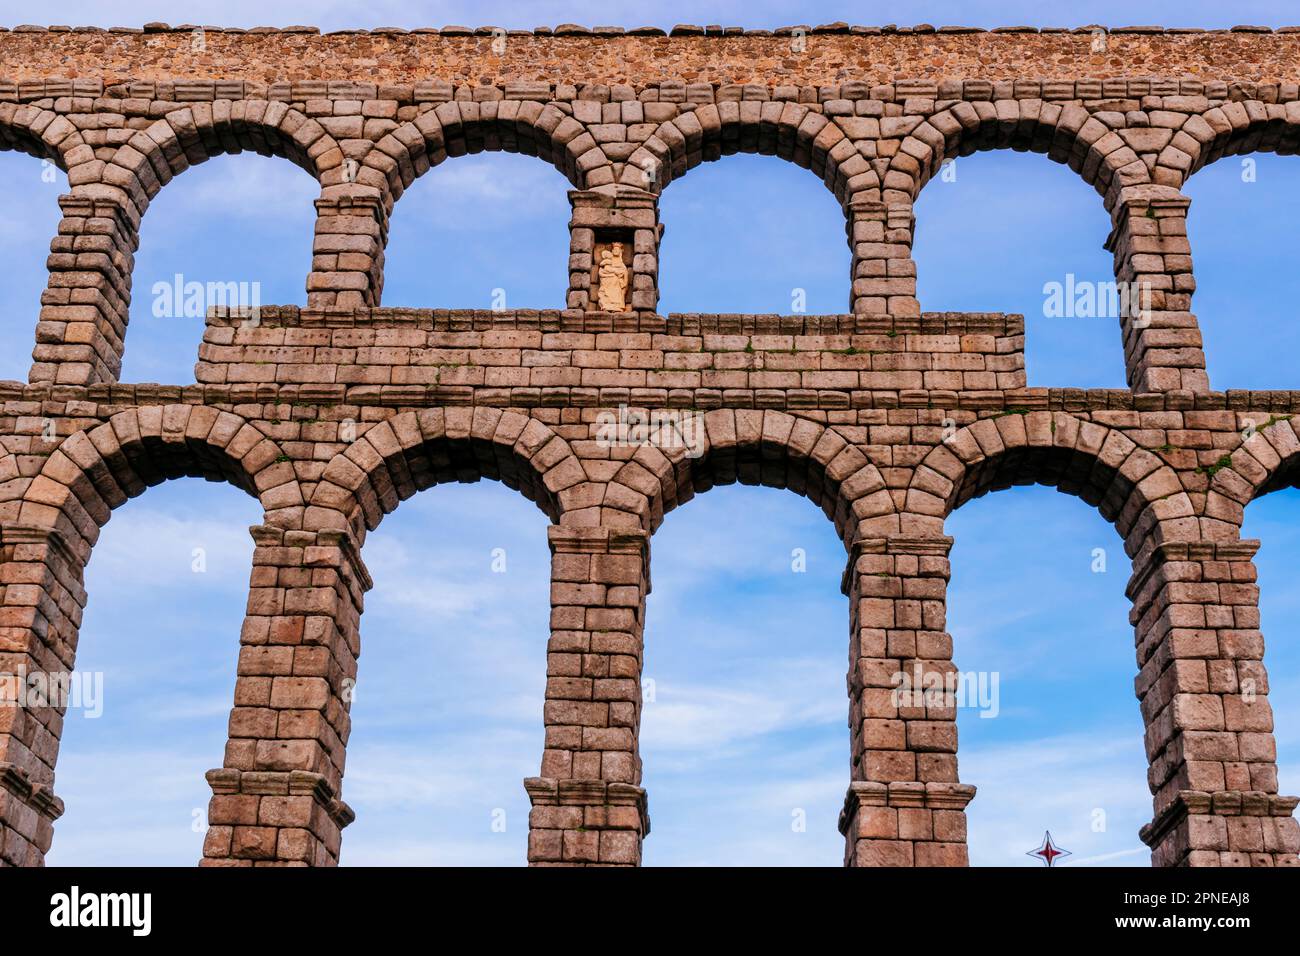 Detail. The Aqueduct of Segovia, Acueducto de Segovia, is a Roman aqueduct, one of the best-preserved elevated Roman aqueducts and the foremost symbol Stock Photo